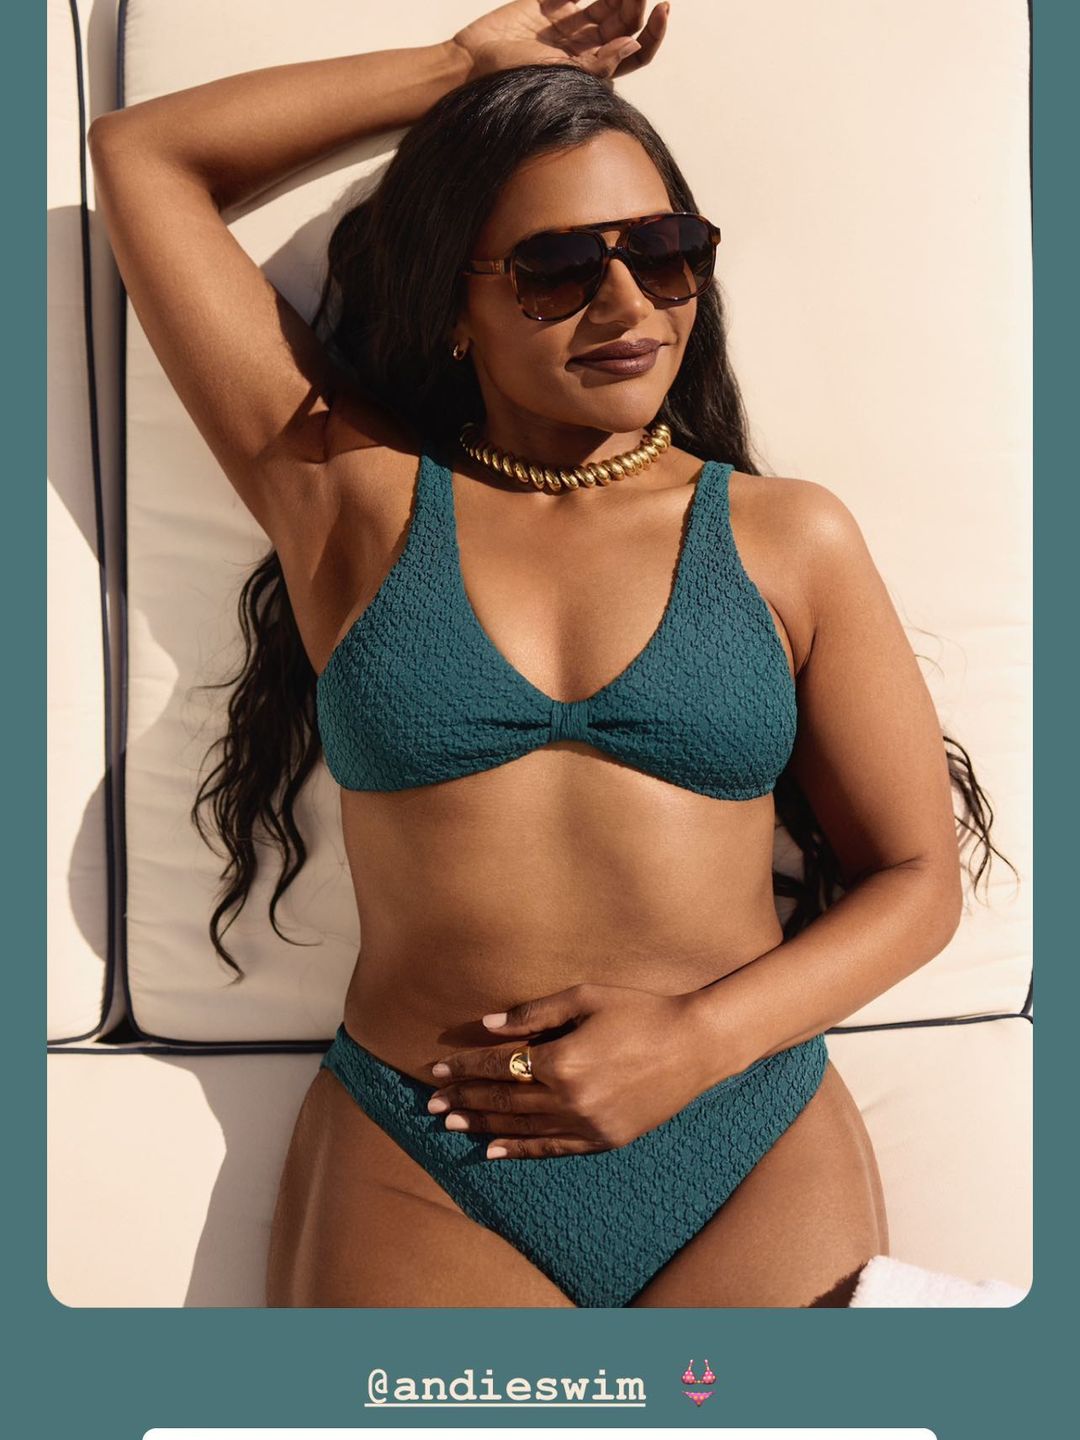 Mindy Kaling lying on a sunlounger in a dragonfly green bikini and sunglasses